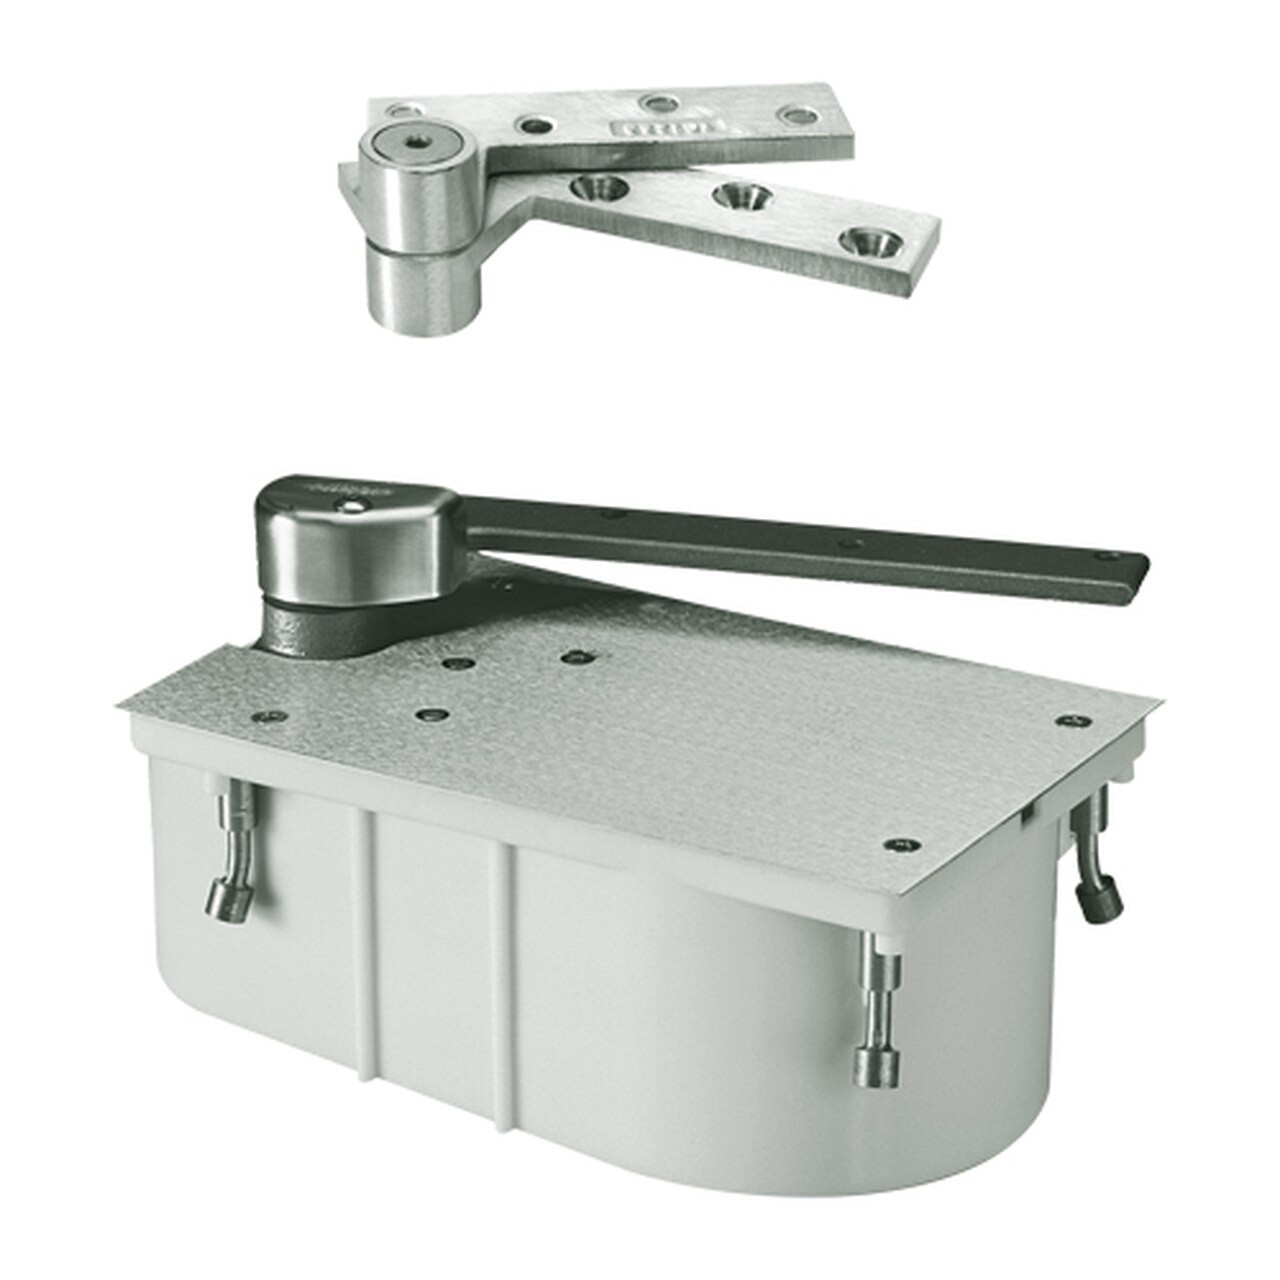 F27-105N-LFP-LCC-RH-619 Rixson 27 Series Fire Rated Heavy Duty 3/4" Offset Hung Floor Closer in Satin Nickel Finish